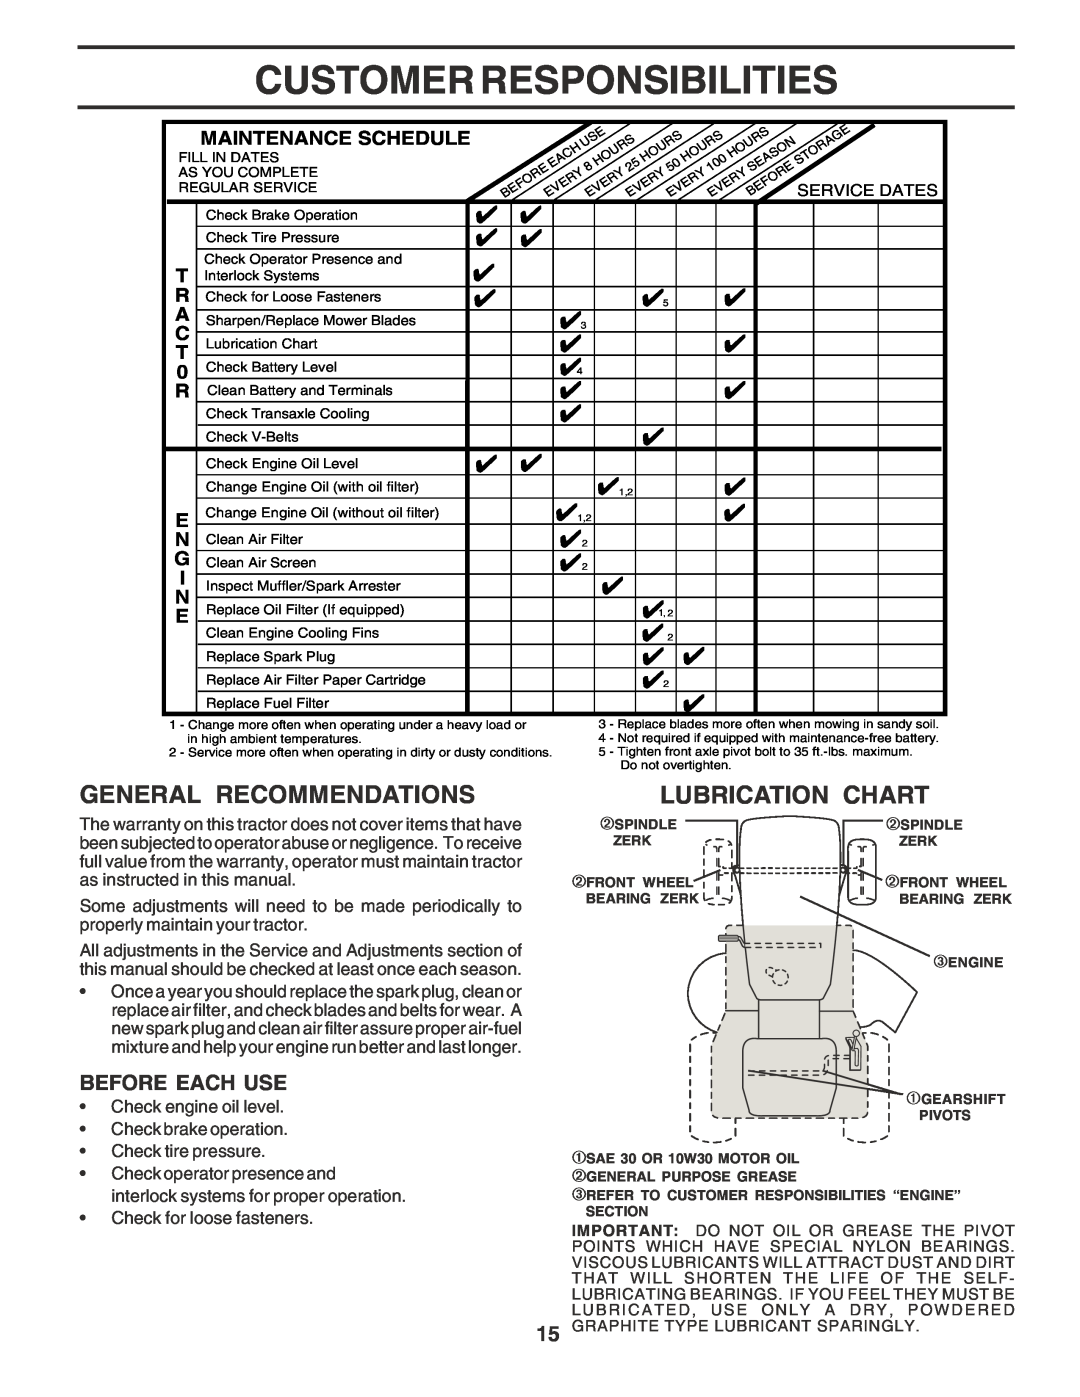 Poulan PR1842STD owner manual Customer Responsibilities, General Recommendations, Lubrication Chart, Before Each Use 